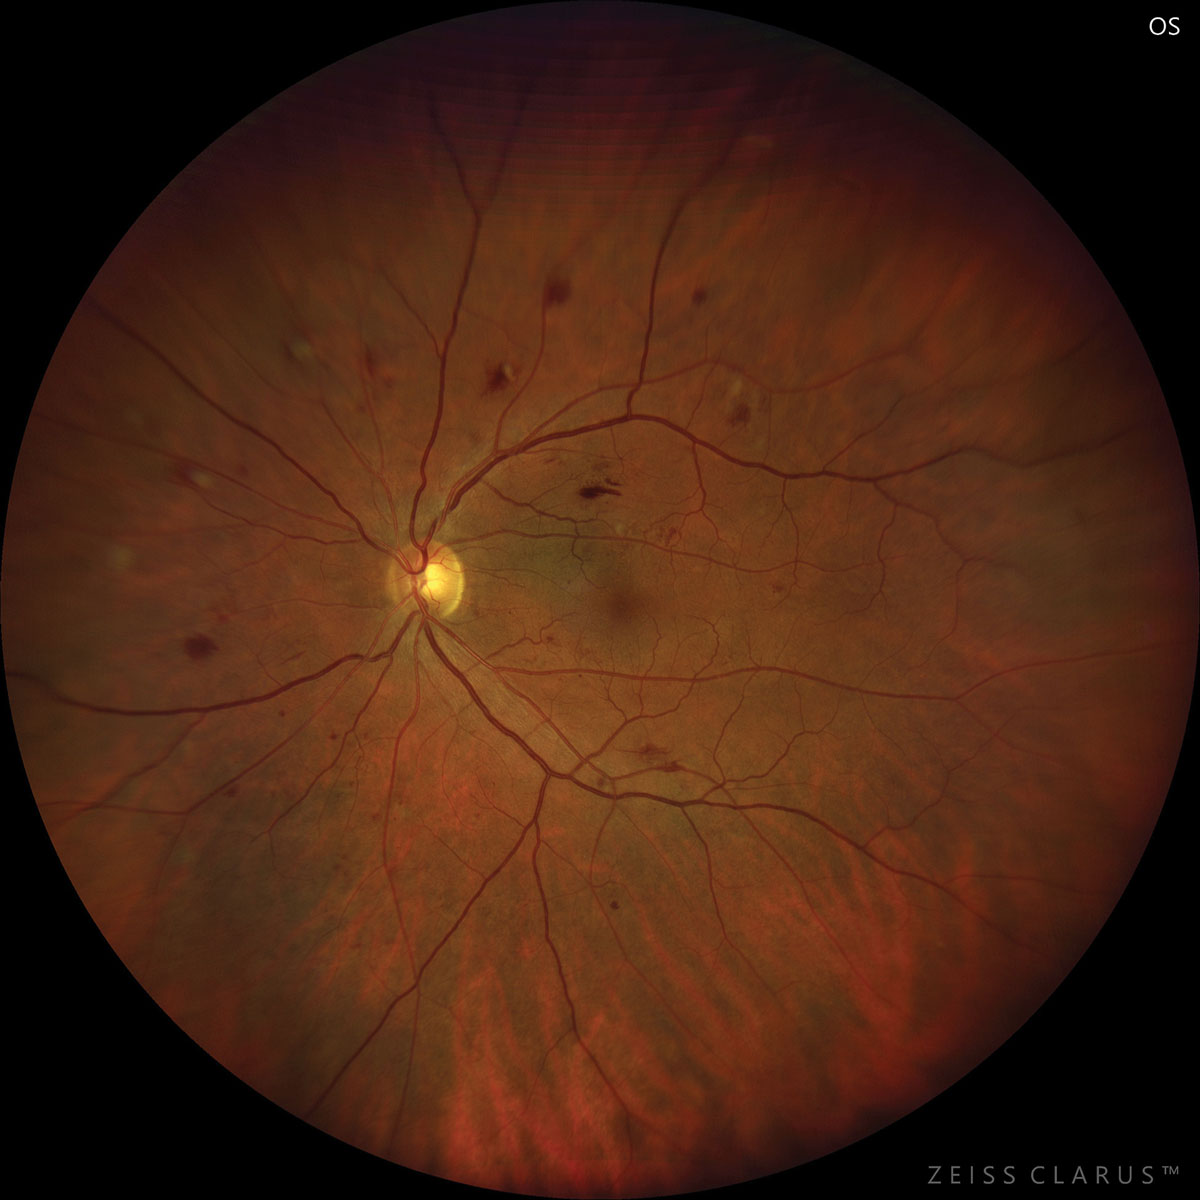 A low estimated glucose disposal rate was associated with greater risk of retinopathy and kidney disease in a large cohort of young individuals.